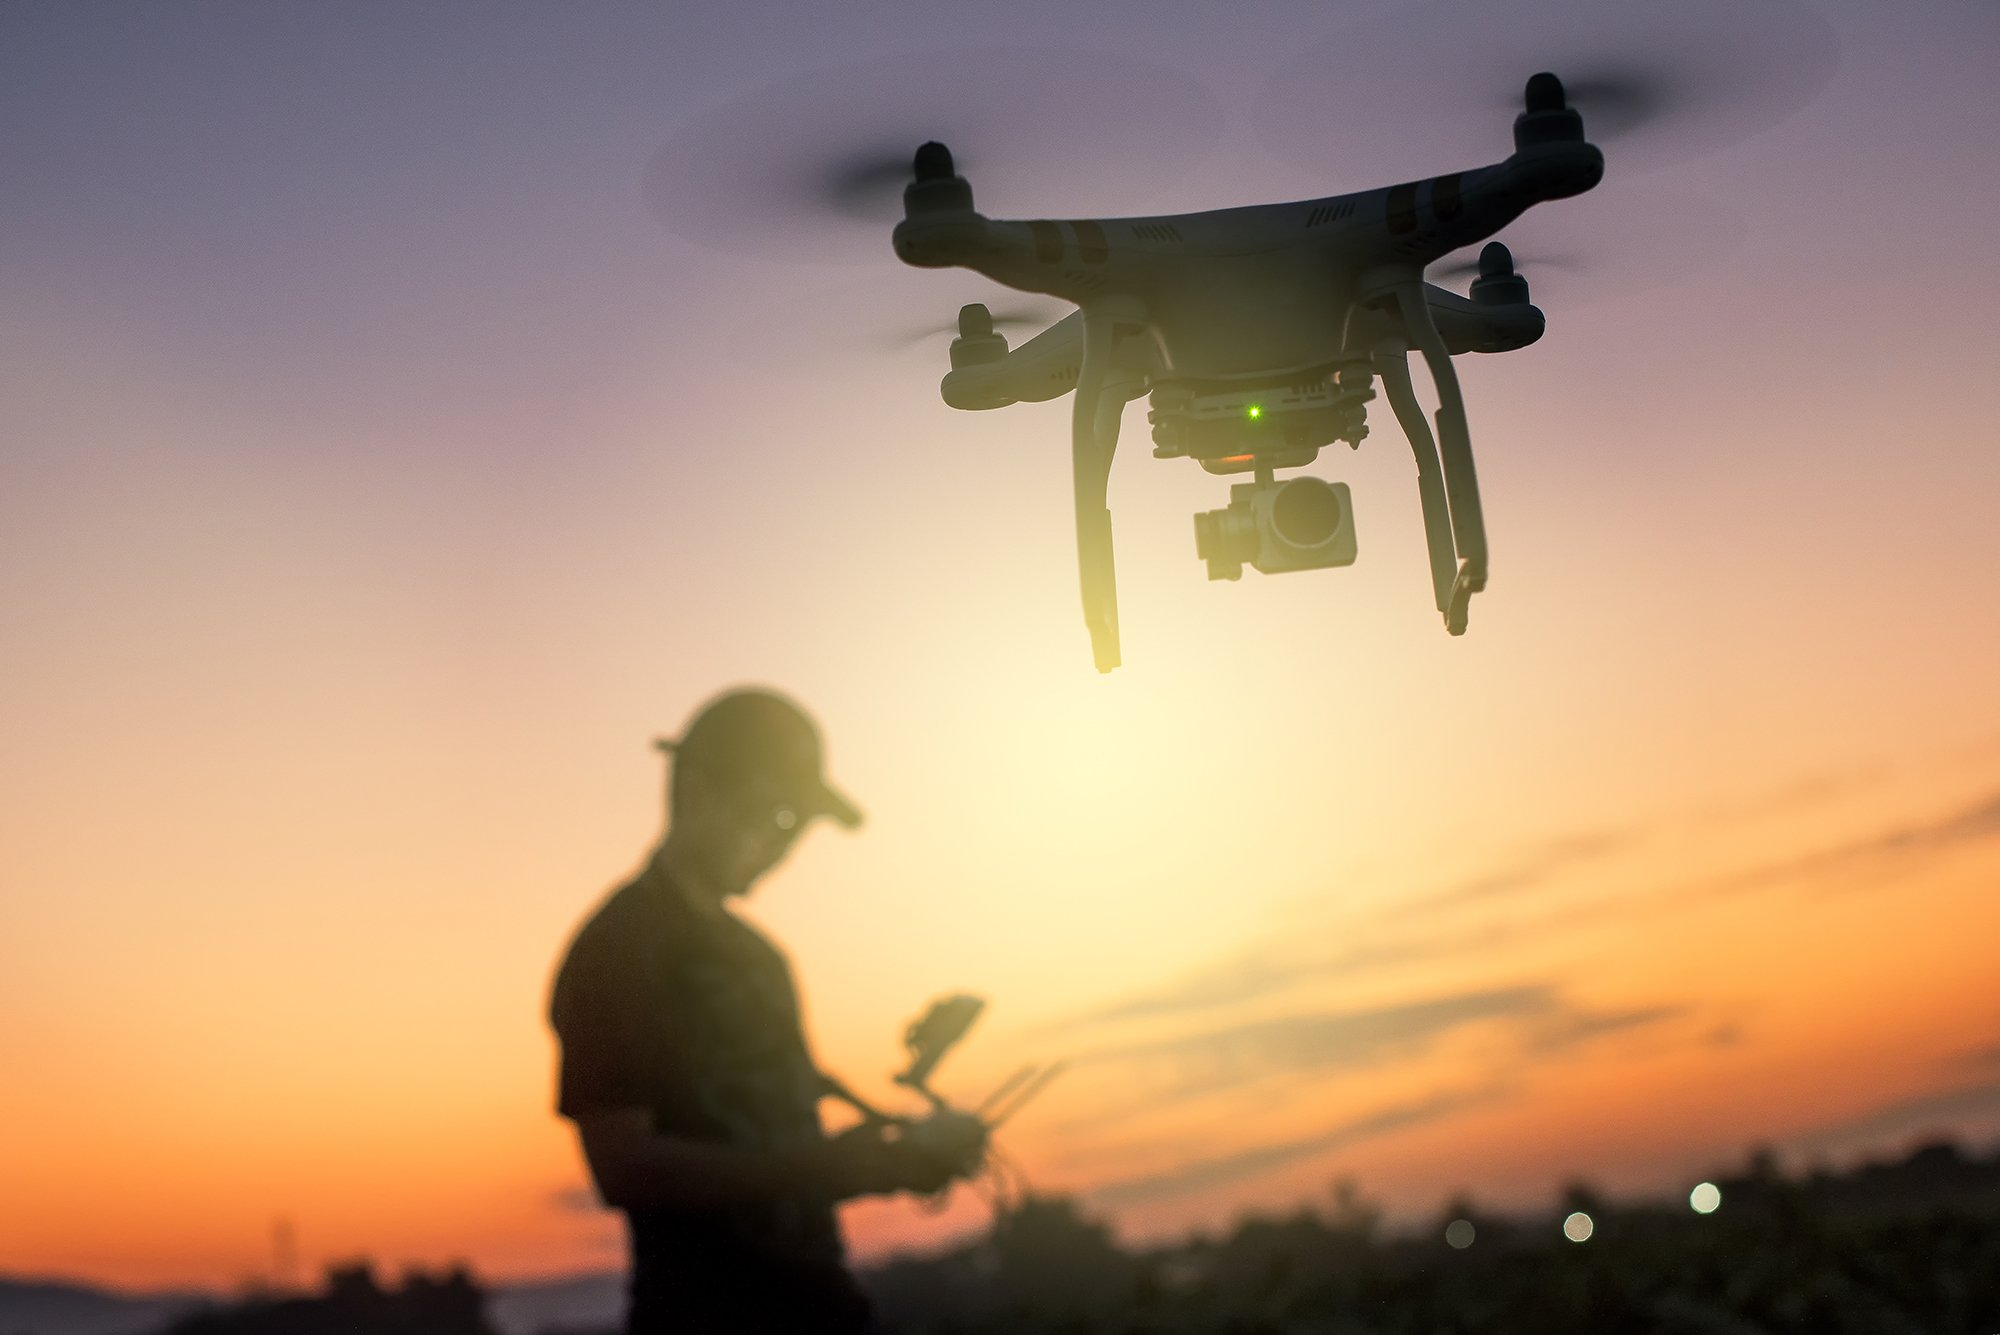 Renewing Your Drone License in 2021